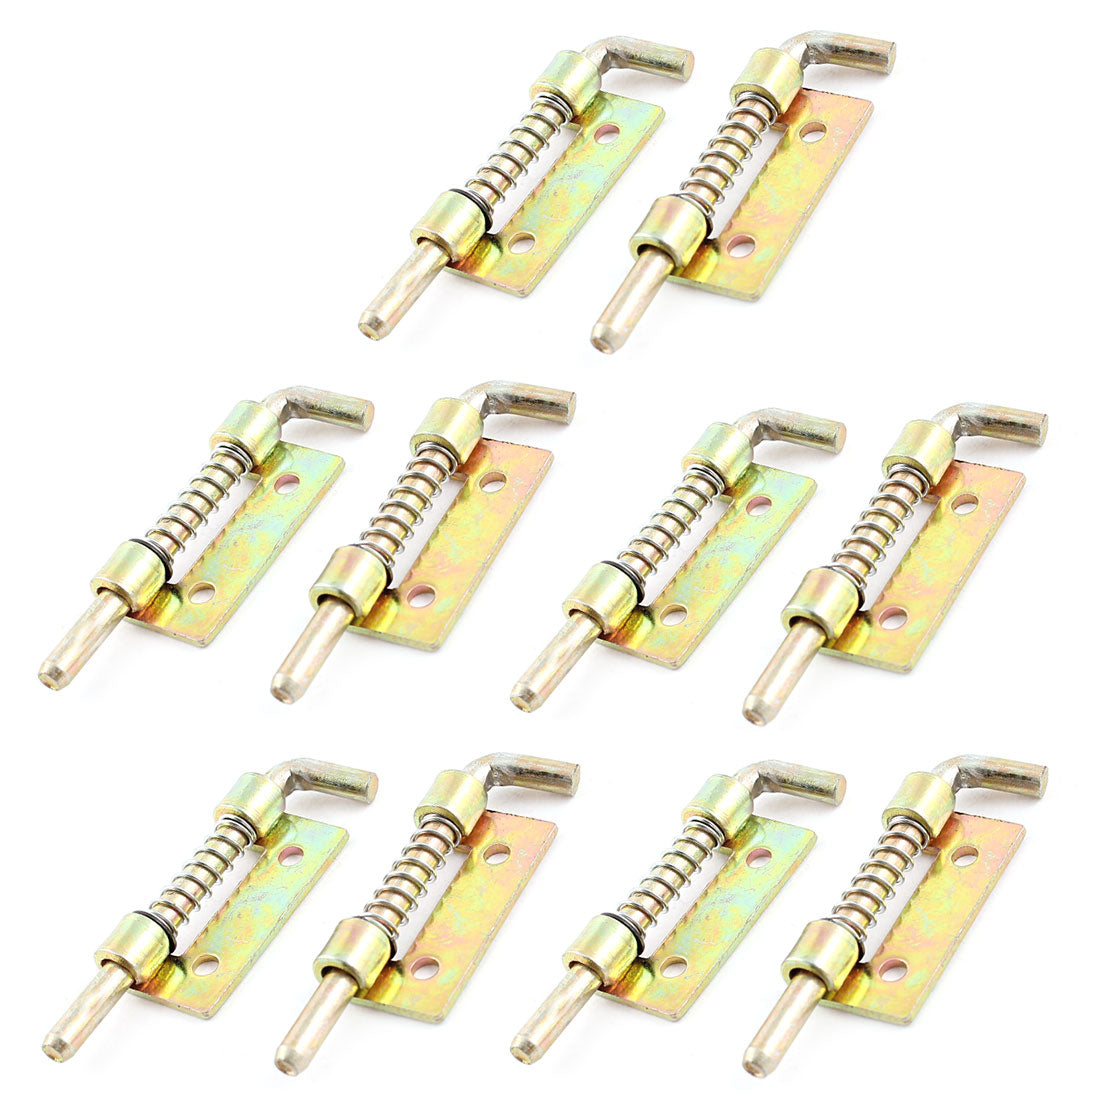 uxcell Uxcell 10pcs Hardware  Fixed Type Bronze Tone Locked Spring Loaded Barrel Bolt Latch 5.5cm Long